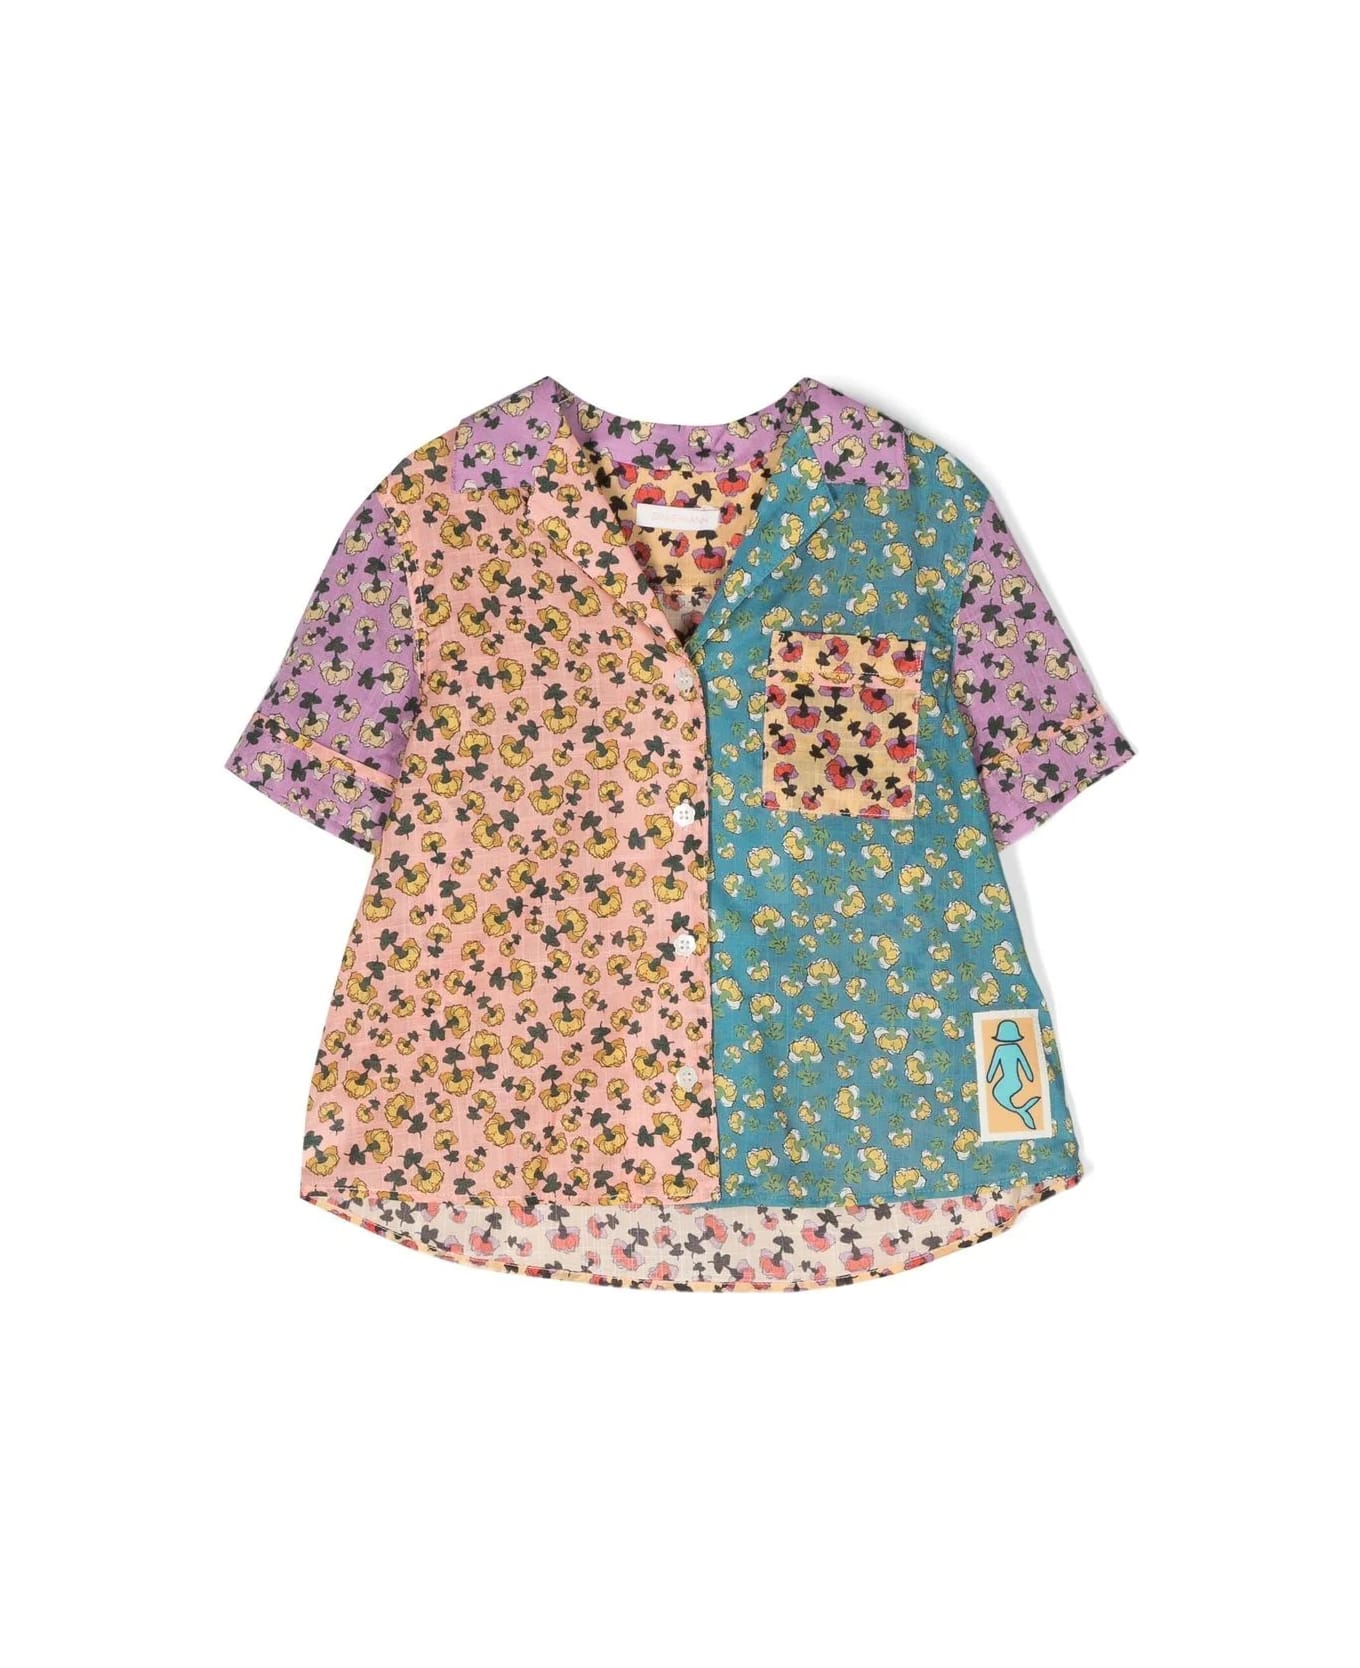 Zimmermann Shirt With Print - Multicolor